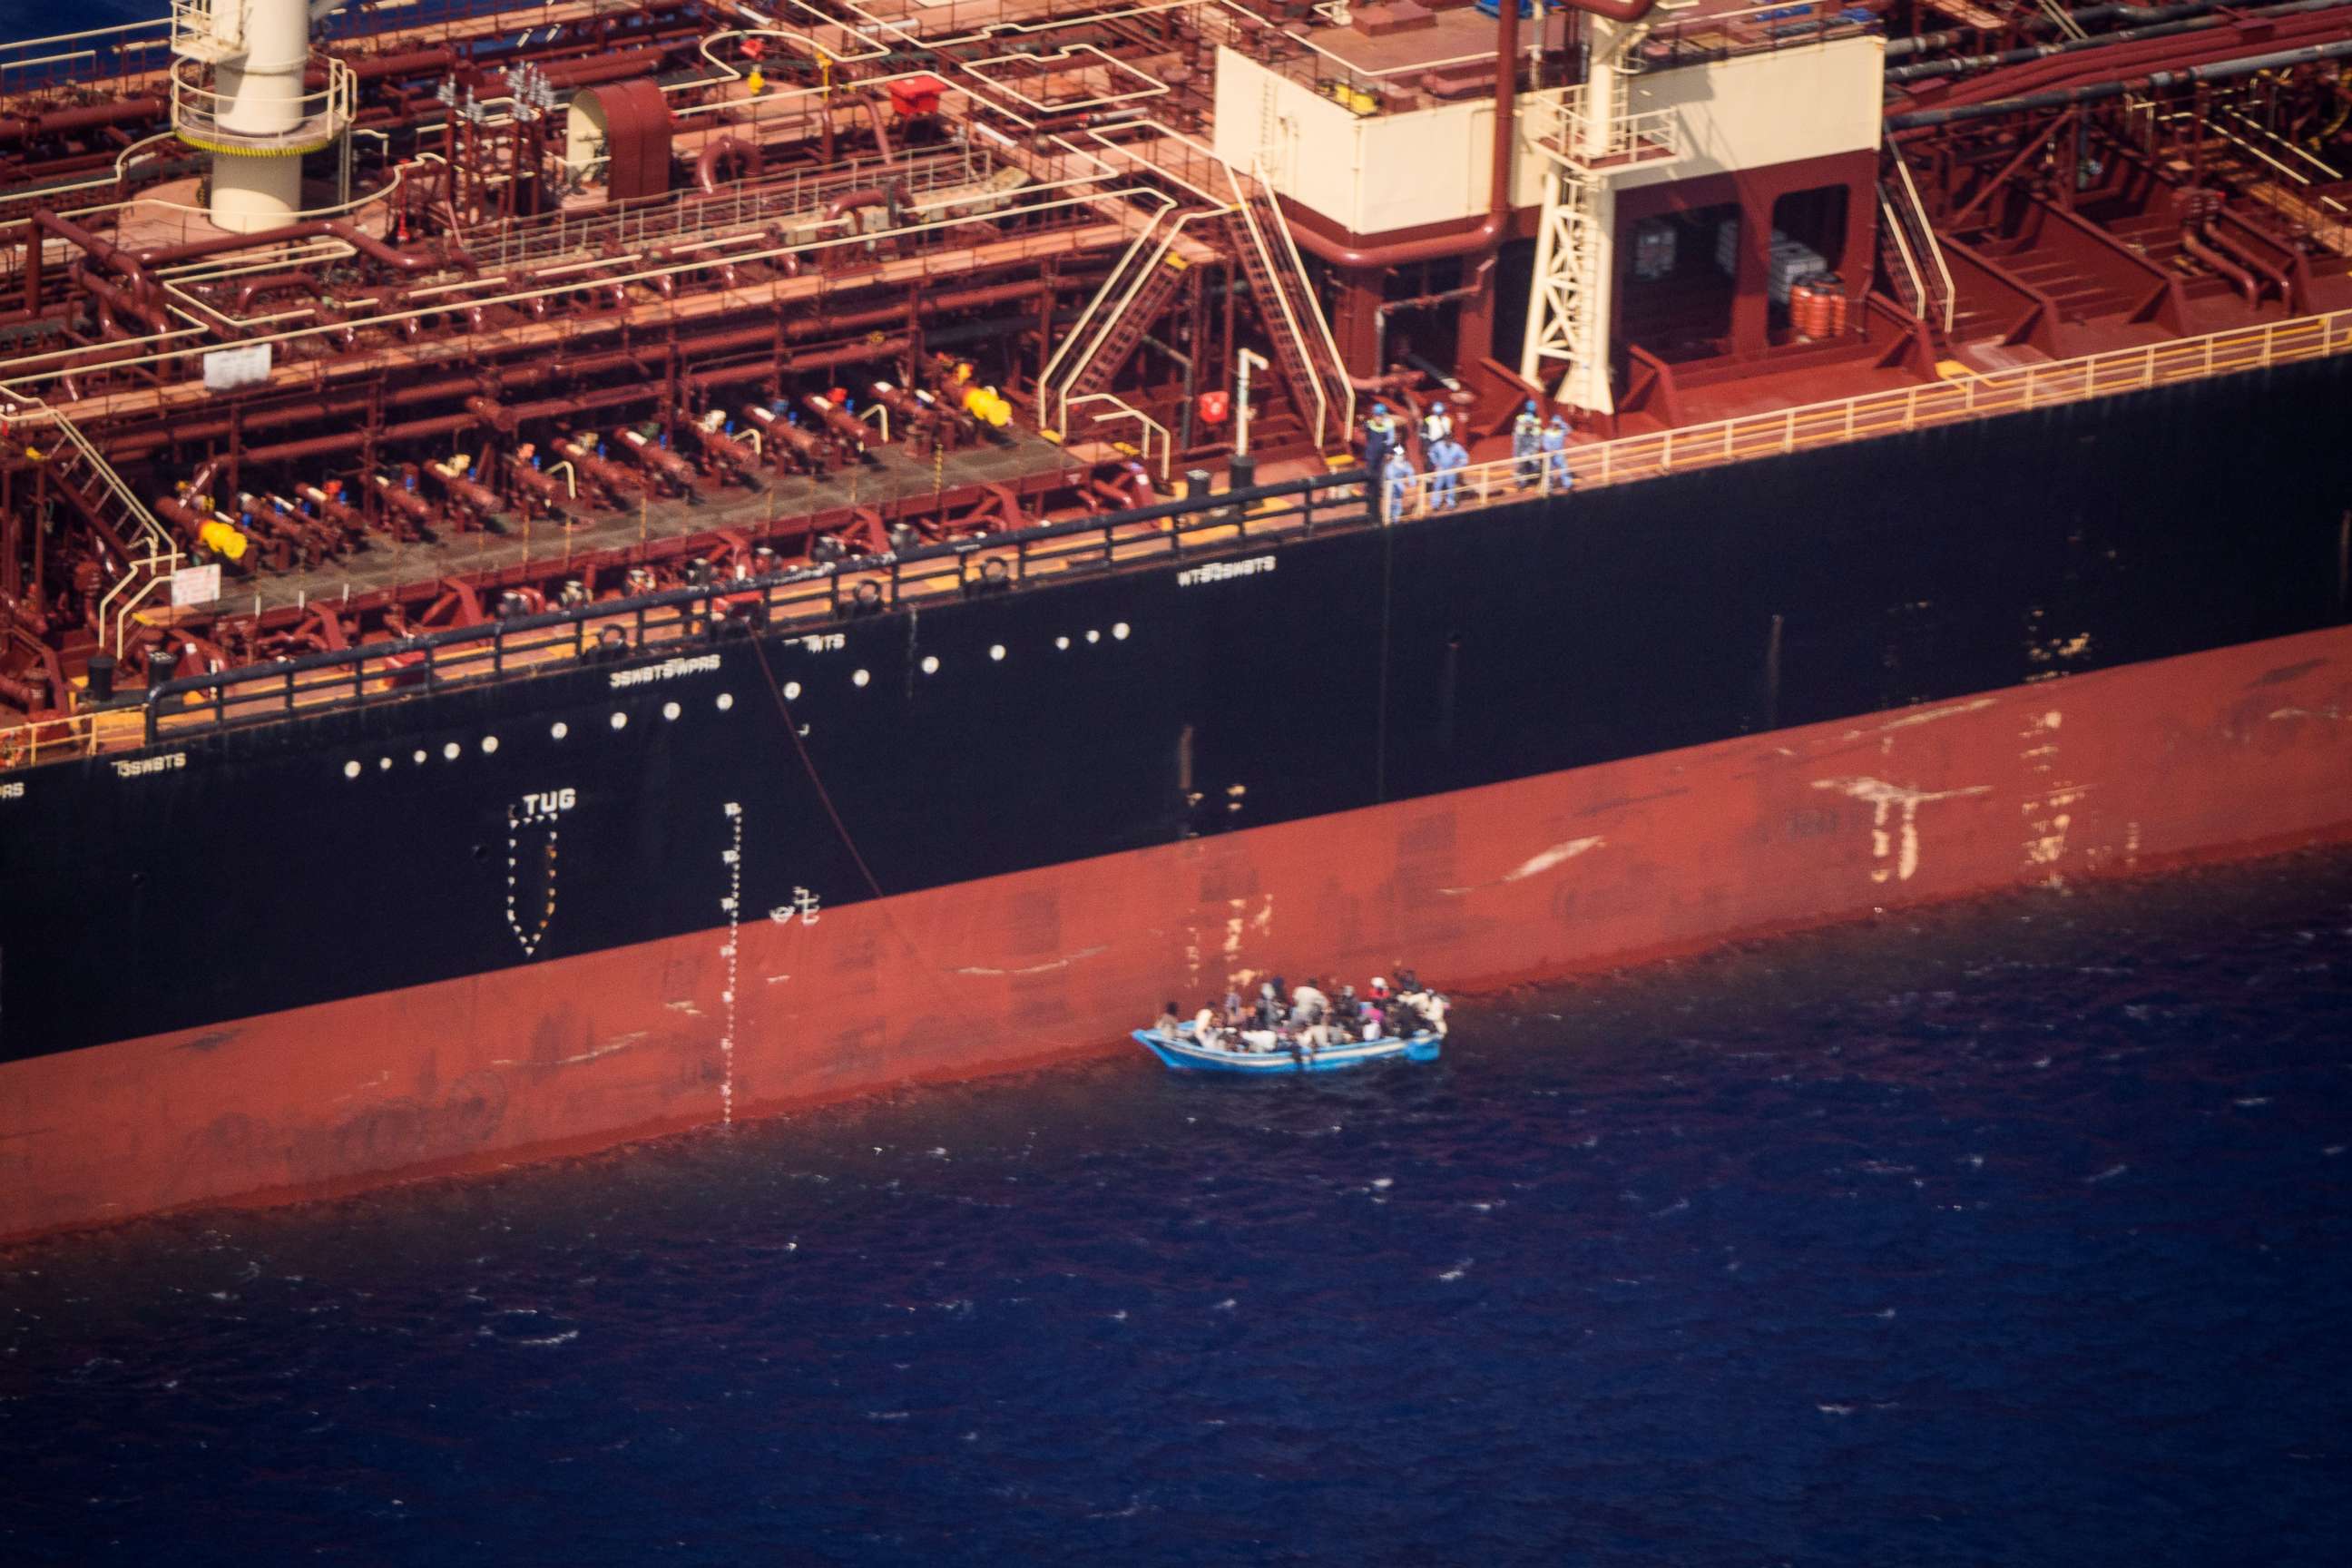 PHOTO: An aerial view shows migrants sitting in a boat alongside the Maersk Etienne tanker off the coast of Malta, Aug. 19, 2020.